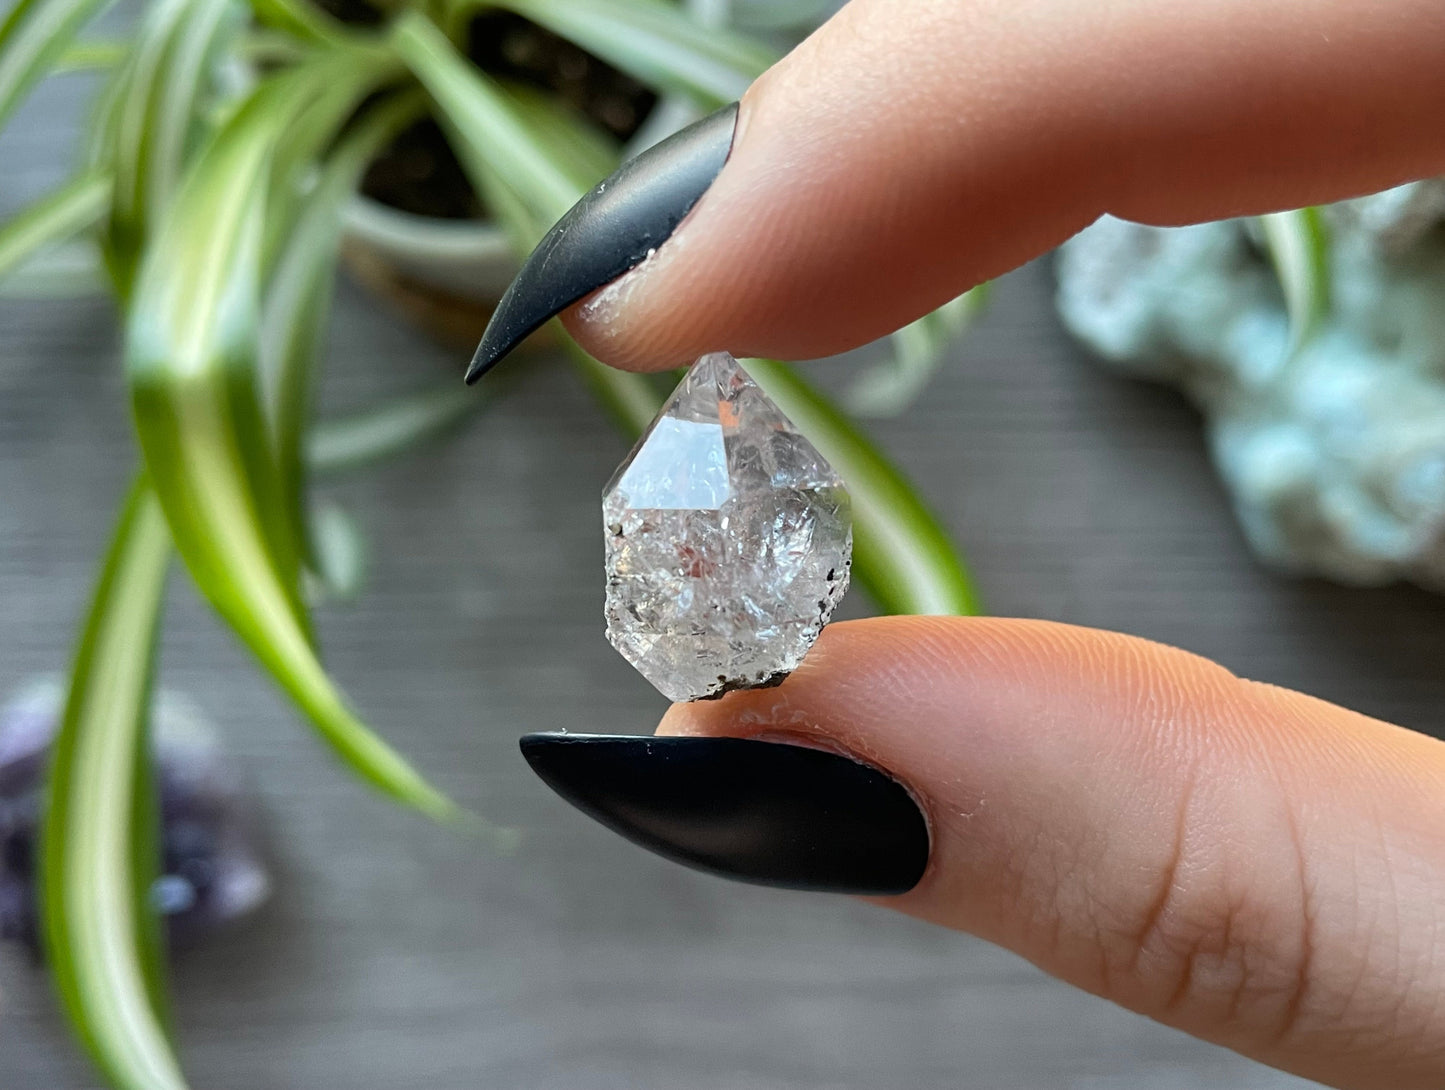 Pictured is a Herkimer diamond.